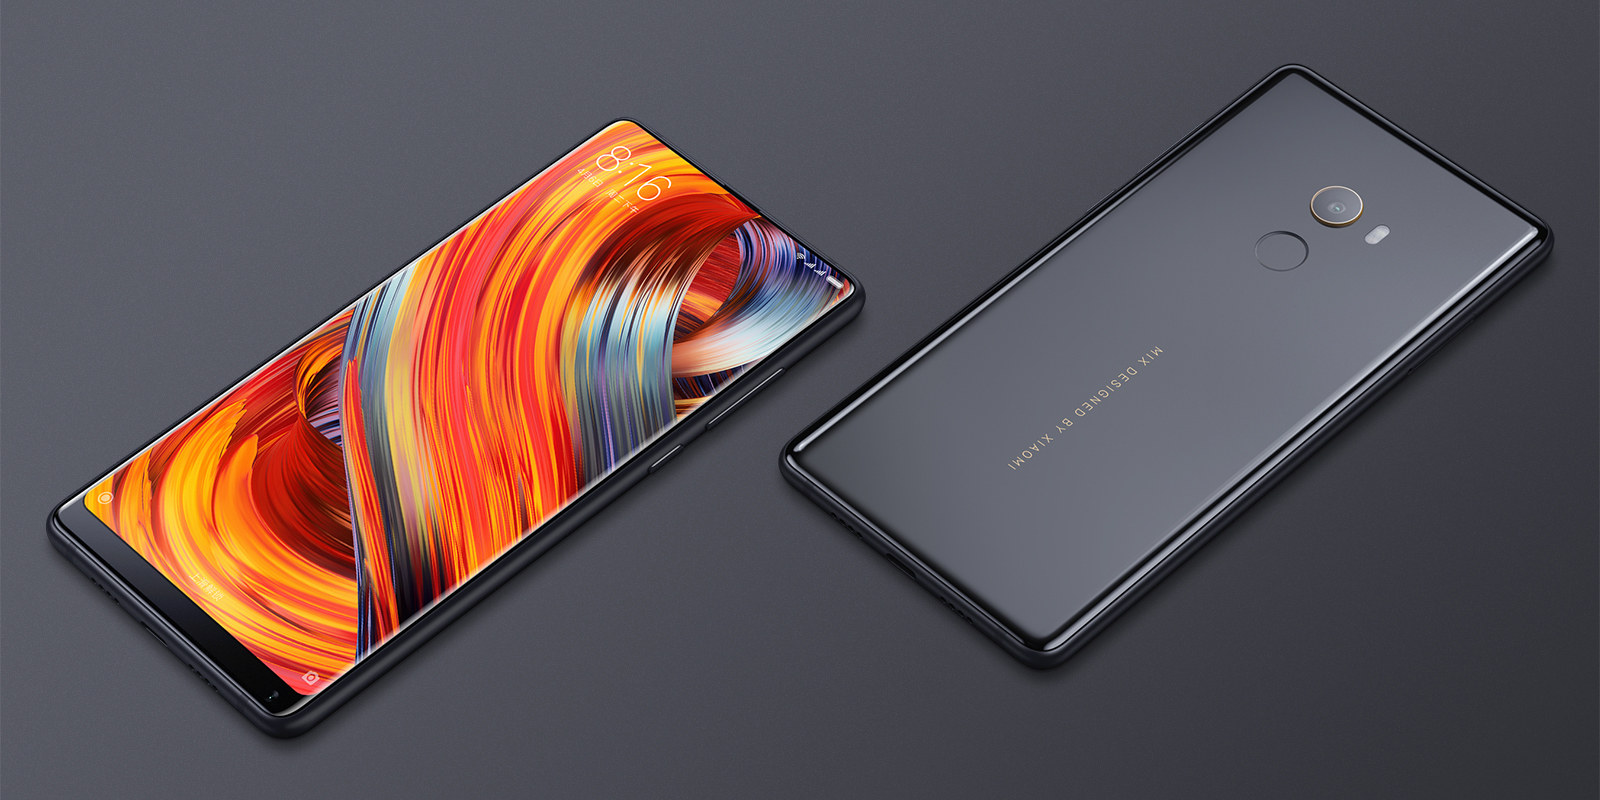 Xiaomi Mi Mix 2 officially launched in Nepal